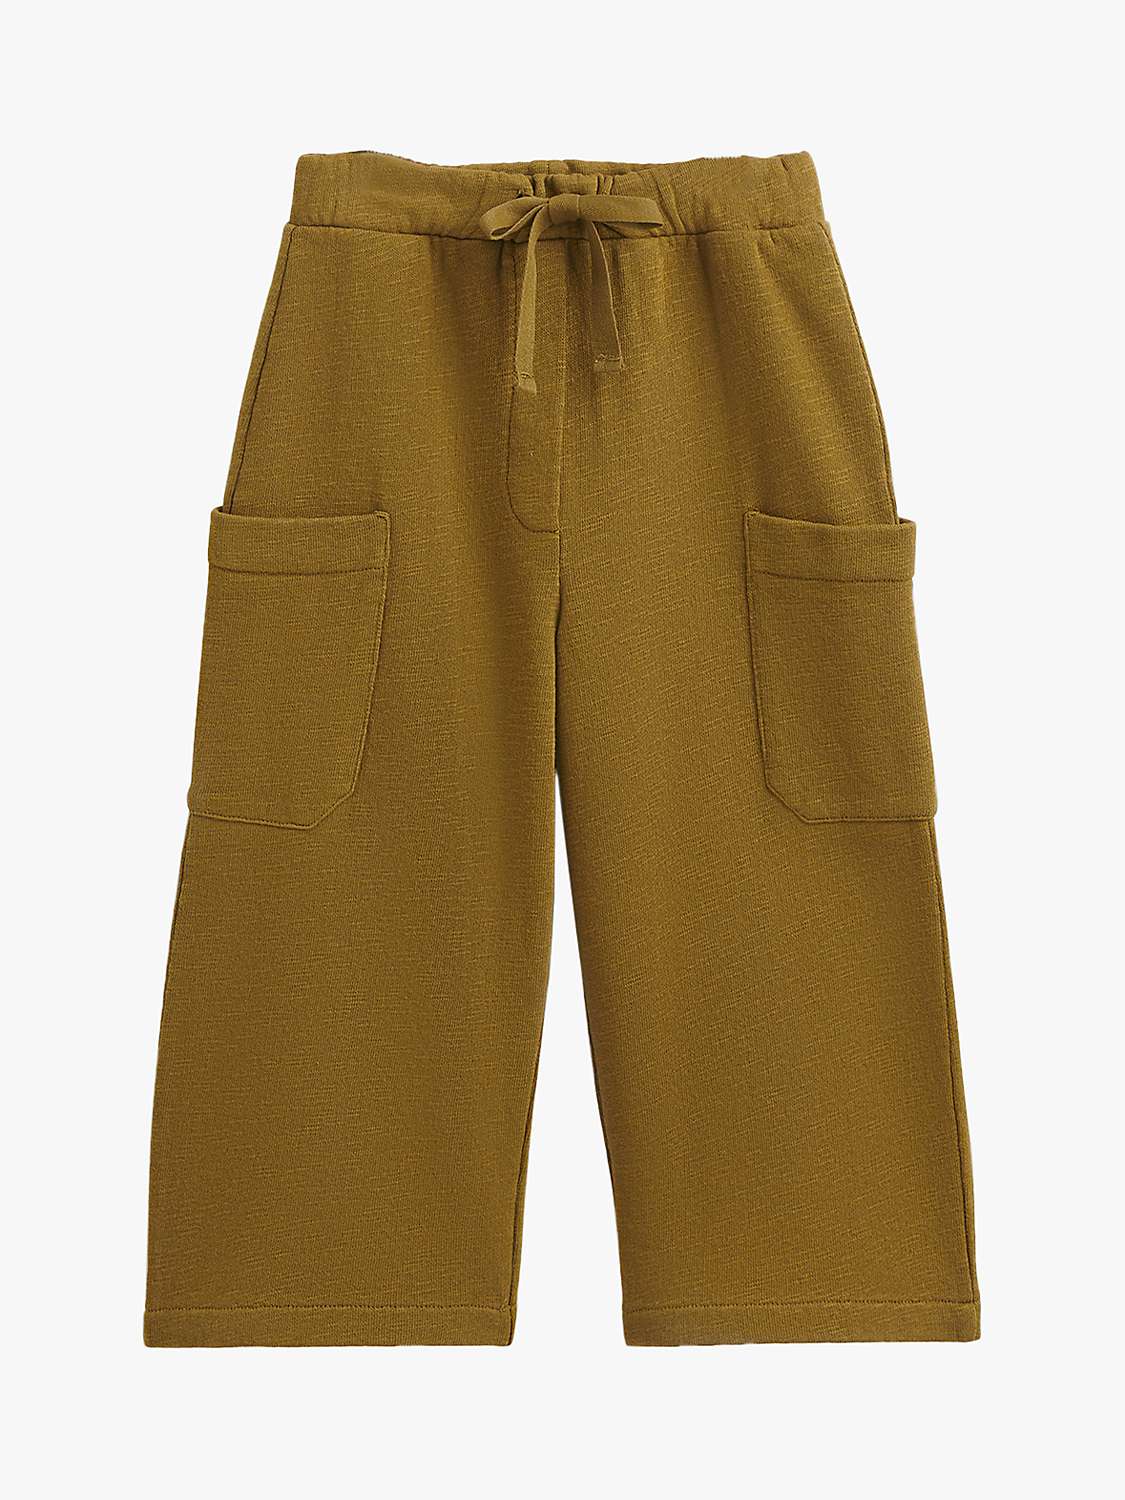 Buy Whistles Kids' Billy Pocket Trousers Online at johnlewis.com